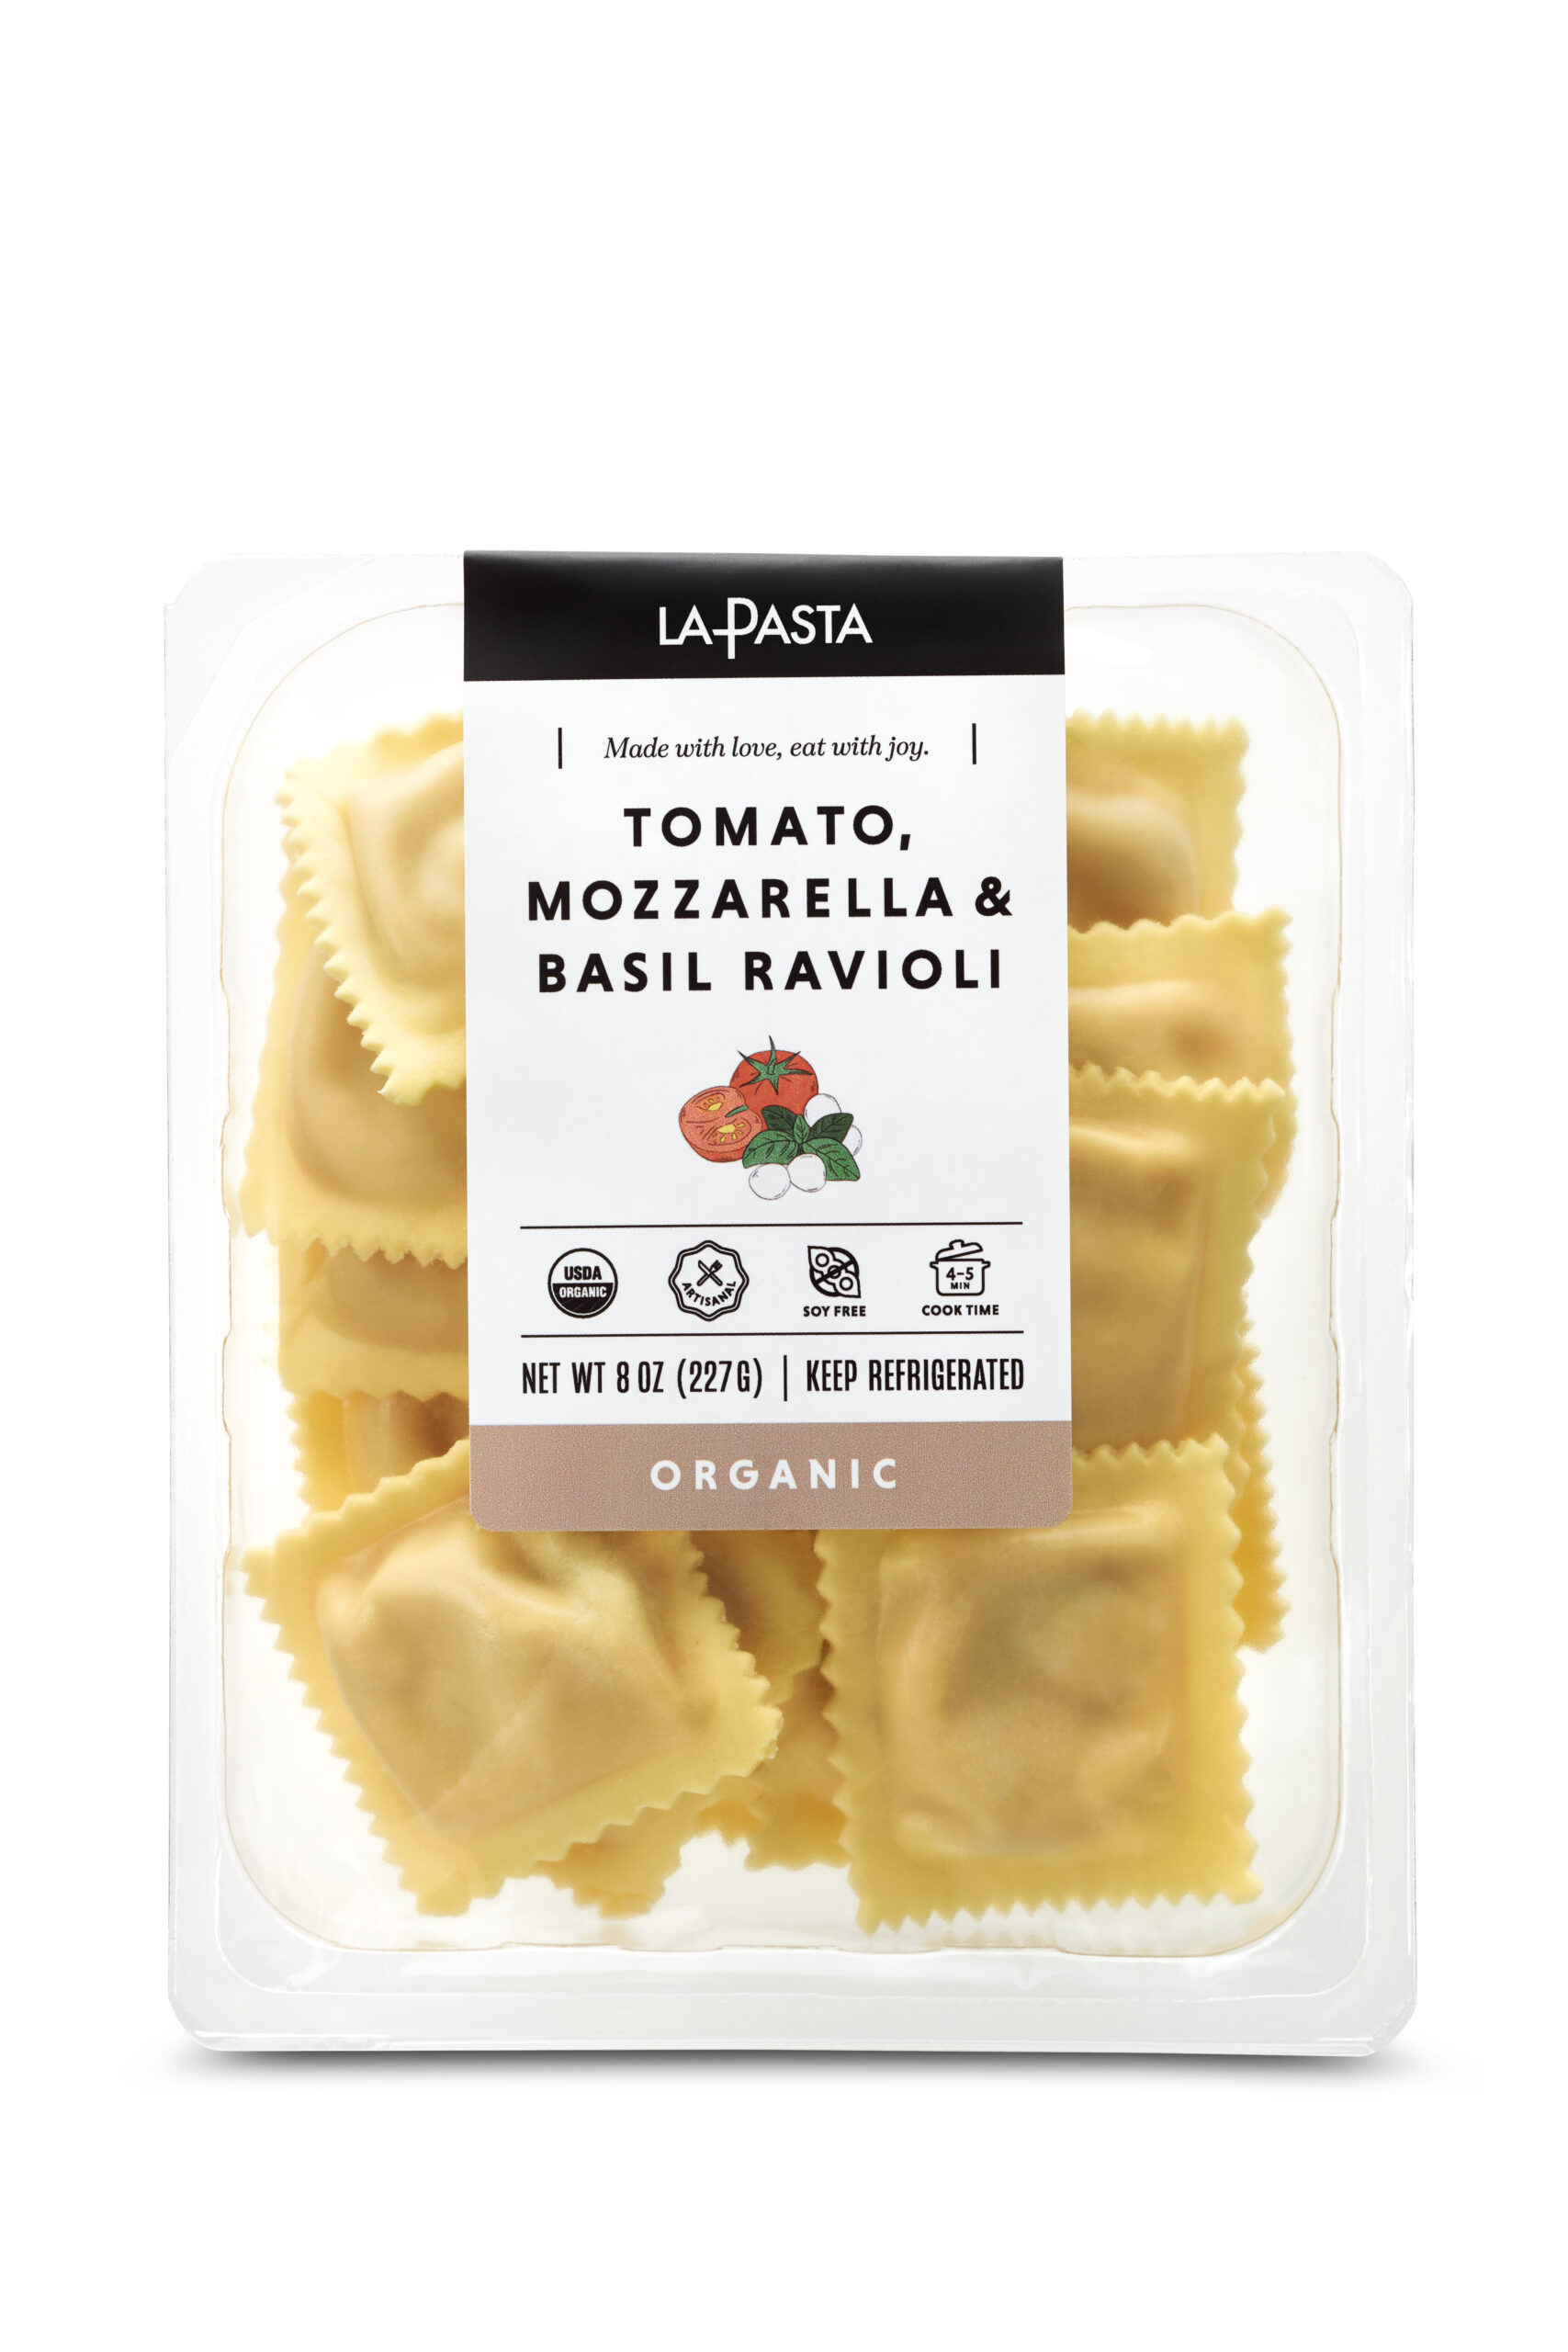 A package of ravioli with tomato, mozzarella and basil.